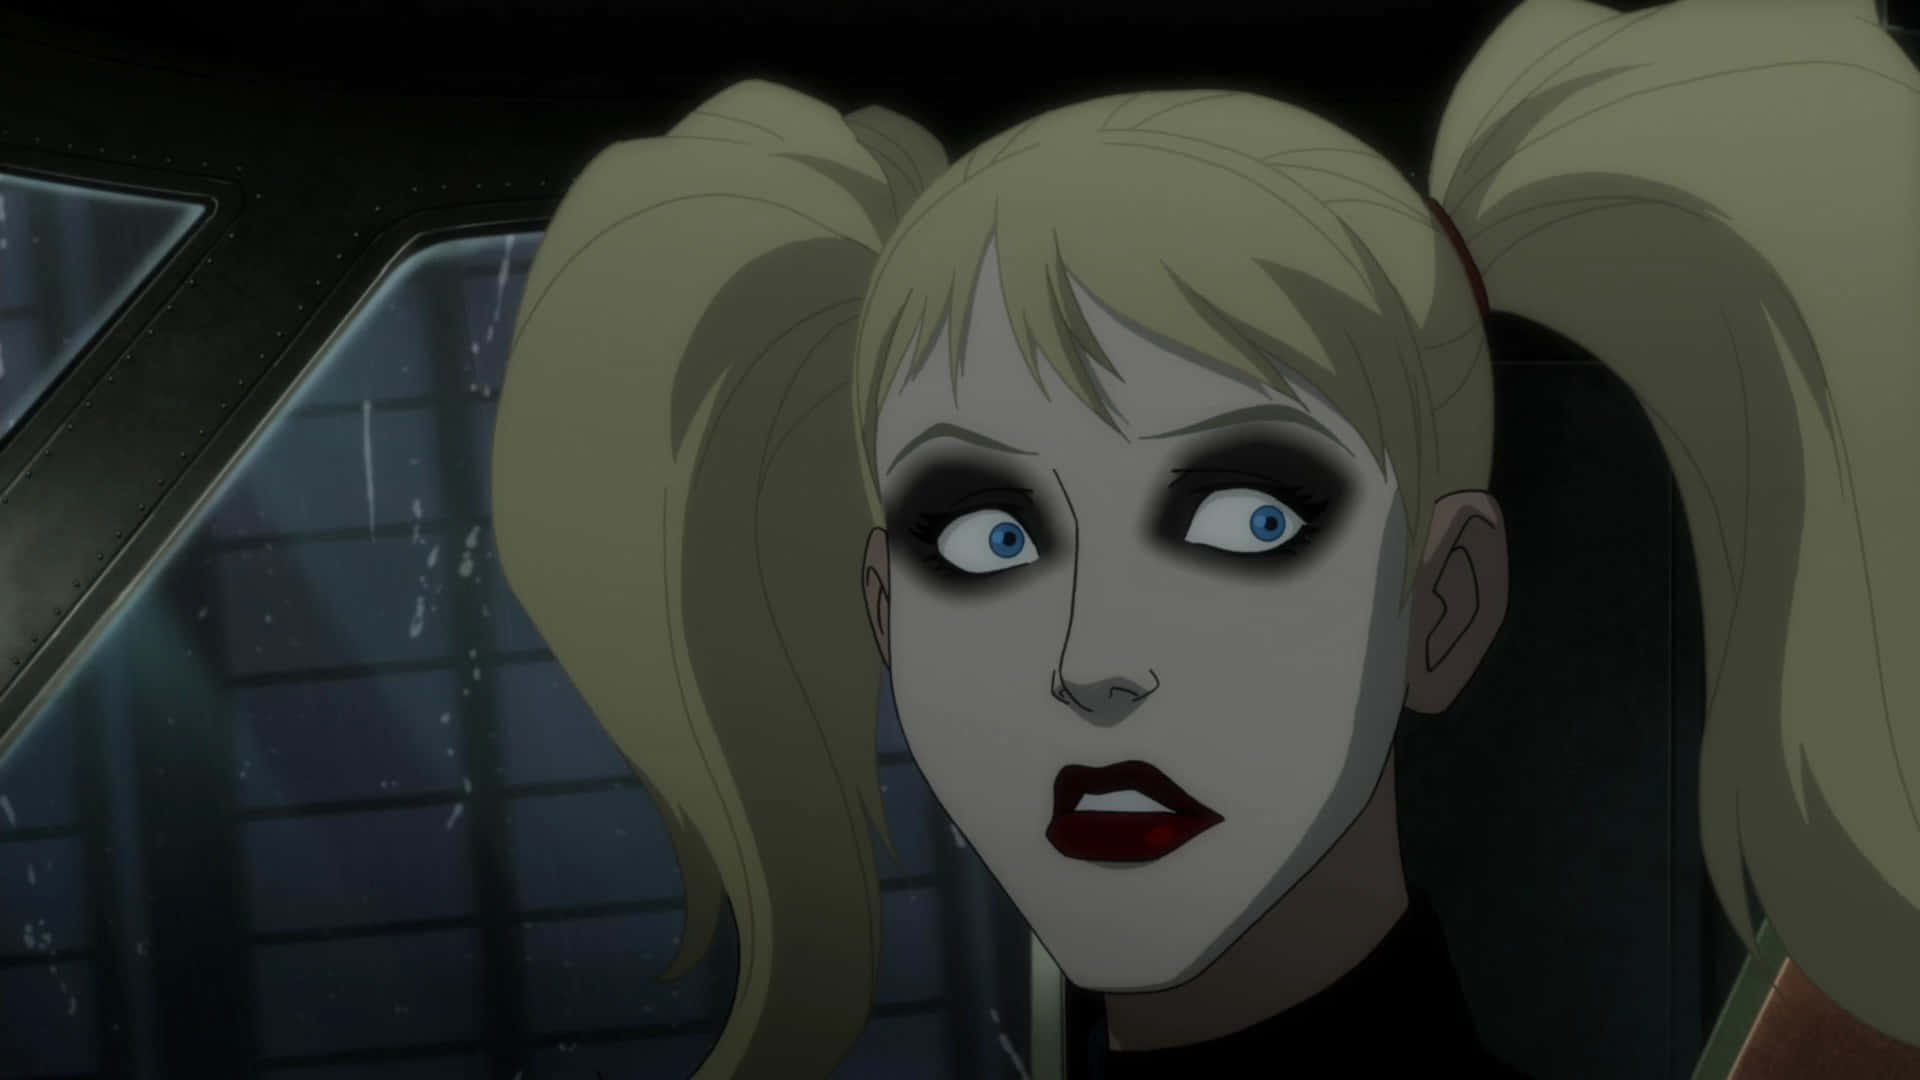 Batman and Suicide Squad in Action in Batman: Assault on Arkham Animation Movie Wallpaper